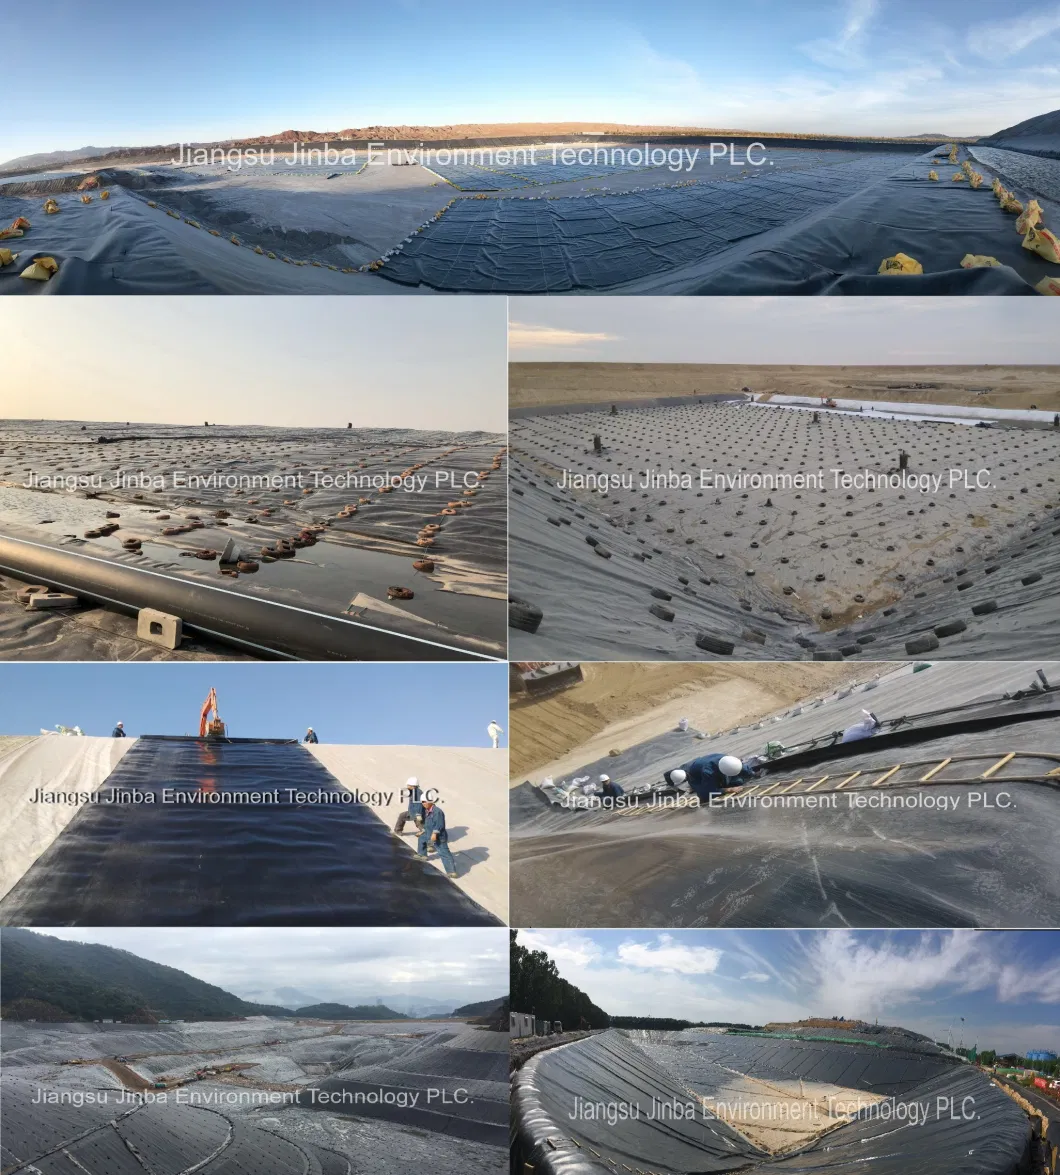 Thickness 0.50-2.00mm Anti-Seepage Impermeable Impervious Waterproof Double-Sided Smooth HDPE Geomembrane for Hazardous Waste Landfill